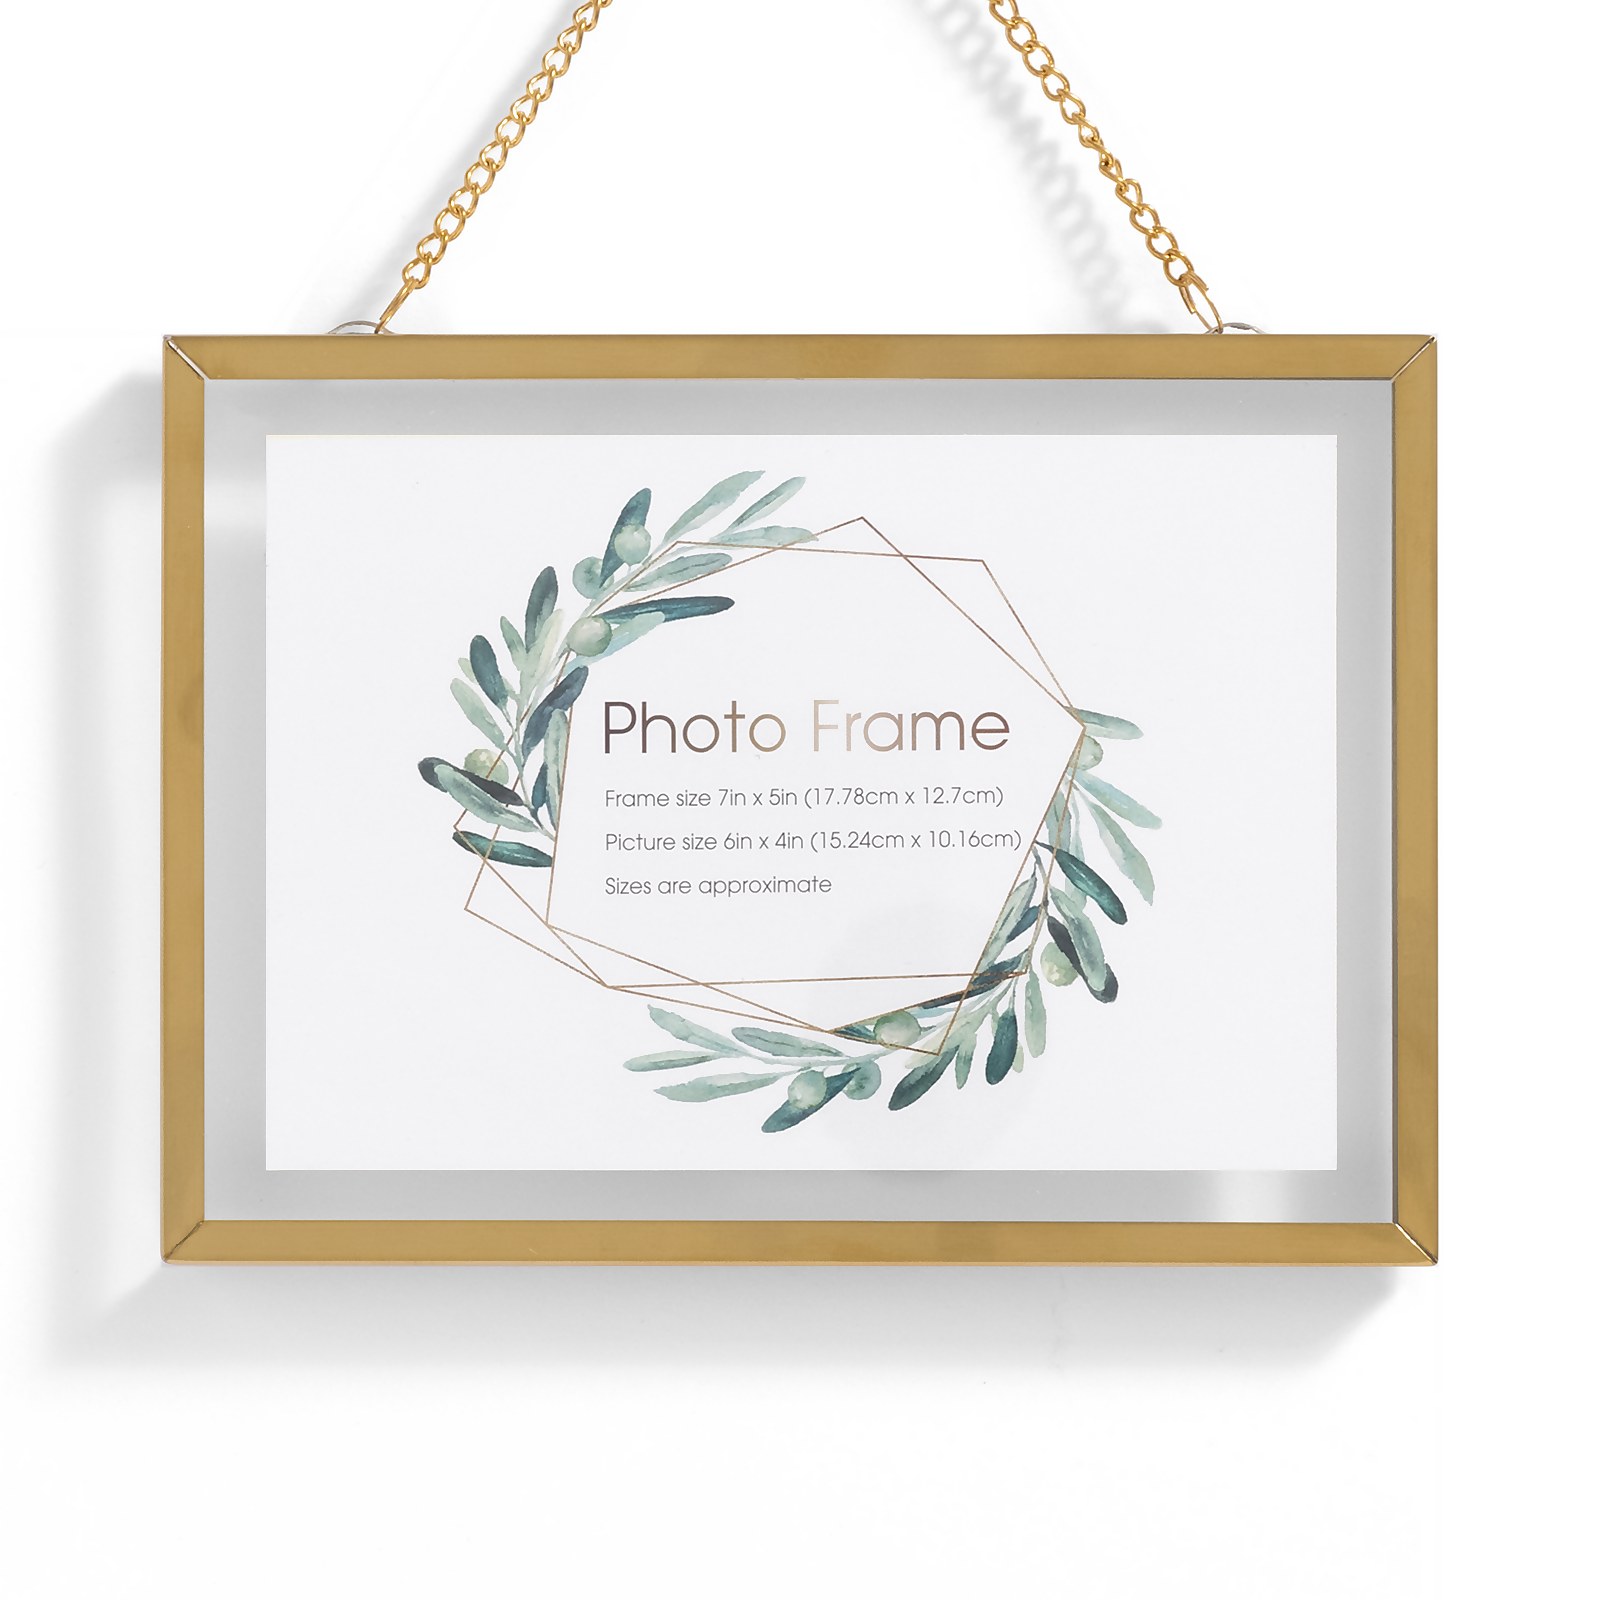 Photo of Hanging Metal Frame - 6x4in - Brushed Brass